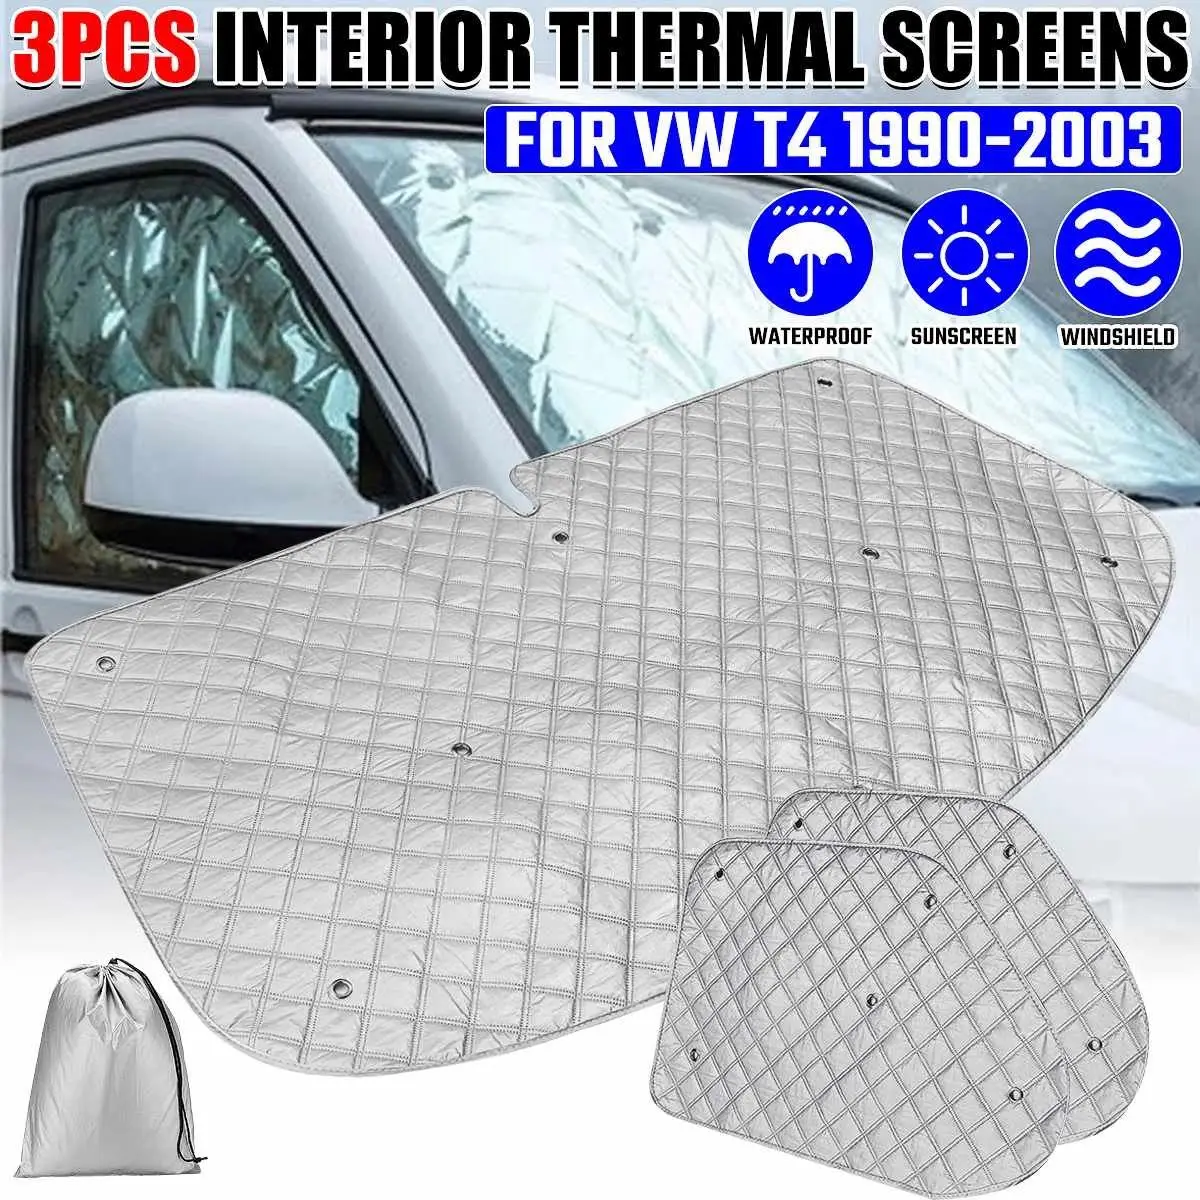 Automobile Car Internal Thermal Windshield Cover Blind Lifting Window Sunshade Sun Visor For VW T4 1990-2003